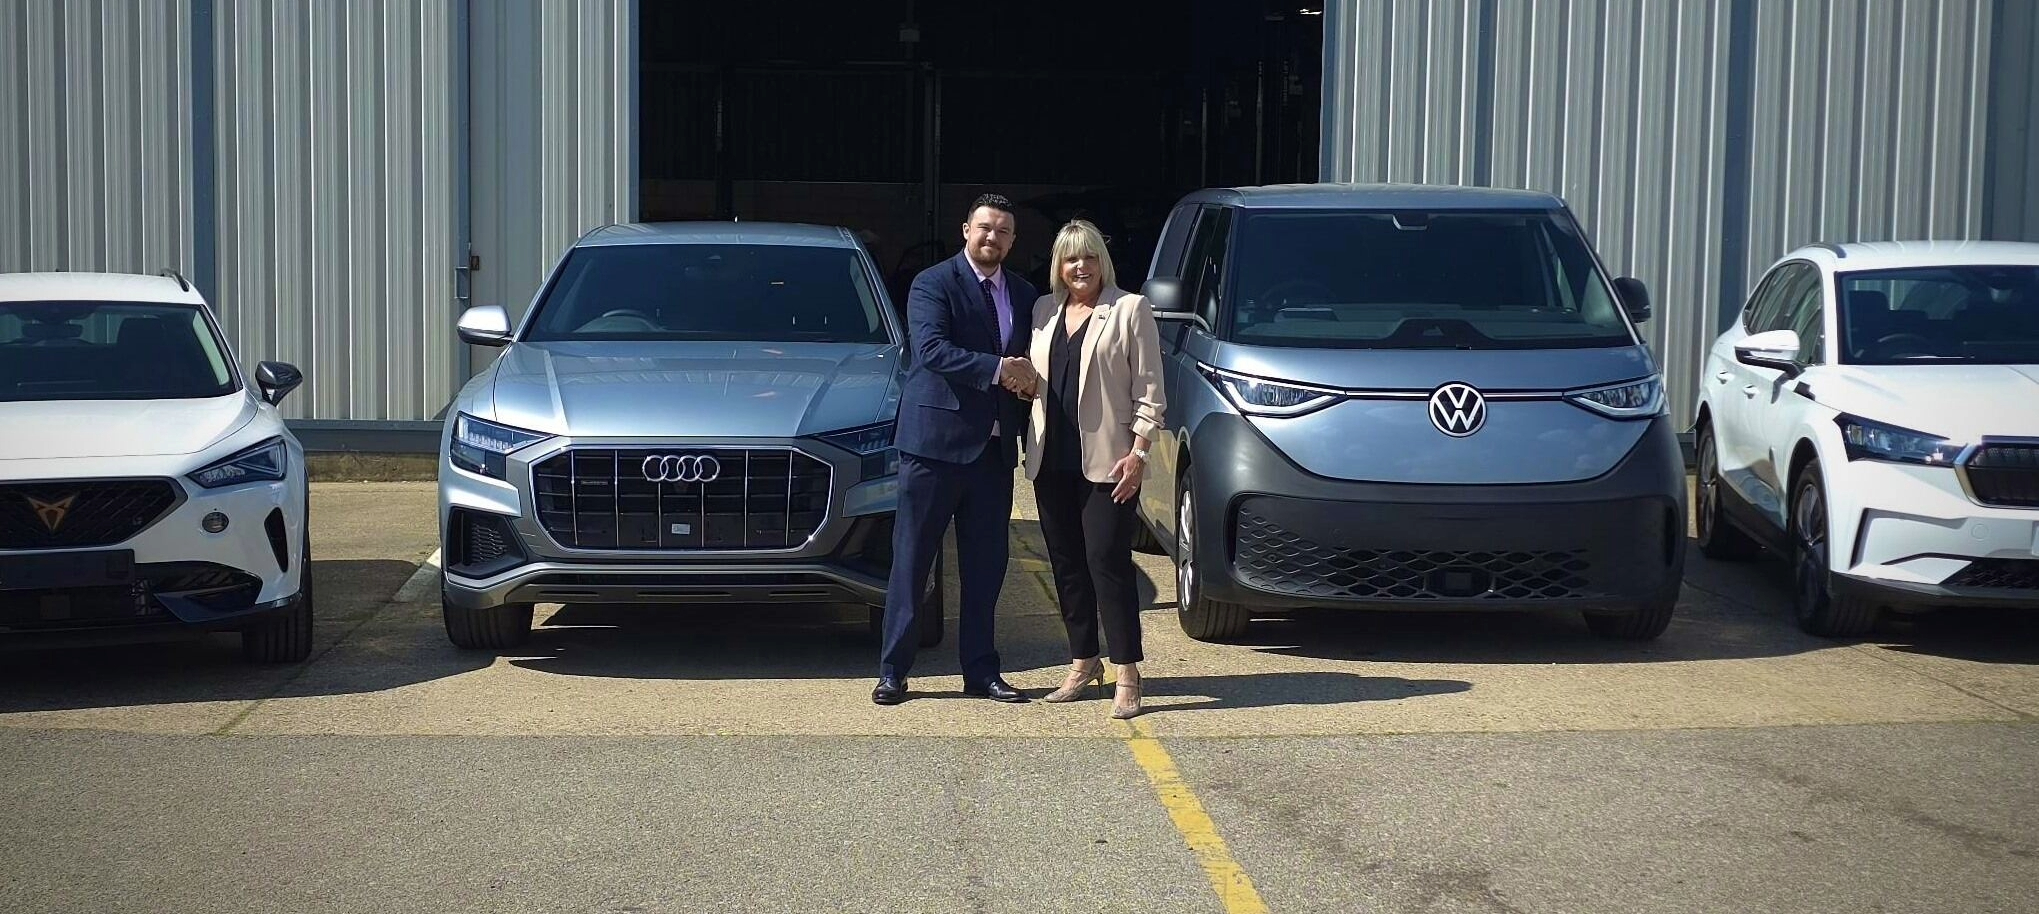 Manheim Vehicle Services agrees deal with Vindis Group to handle thousands of fleet vehicles